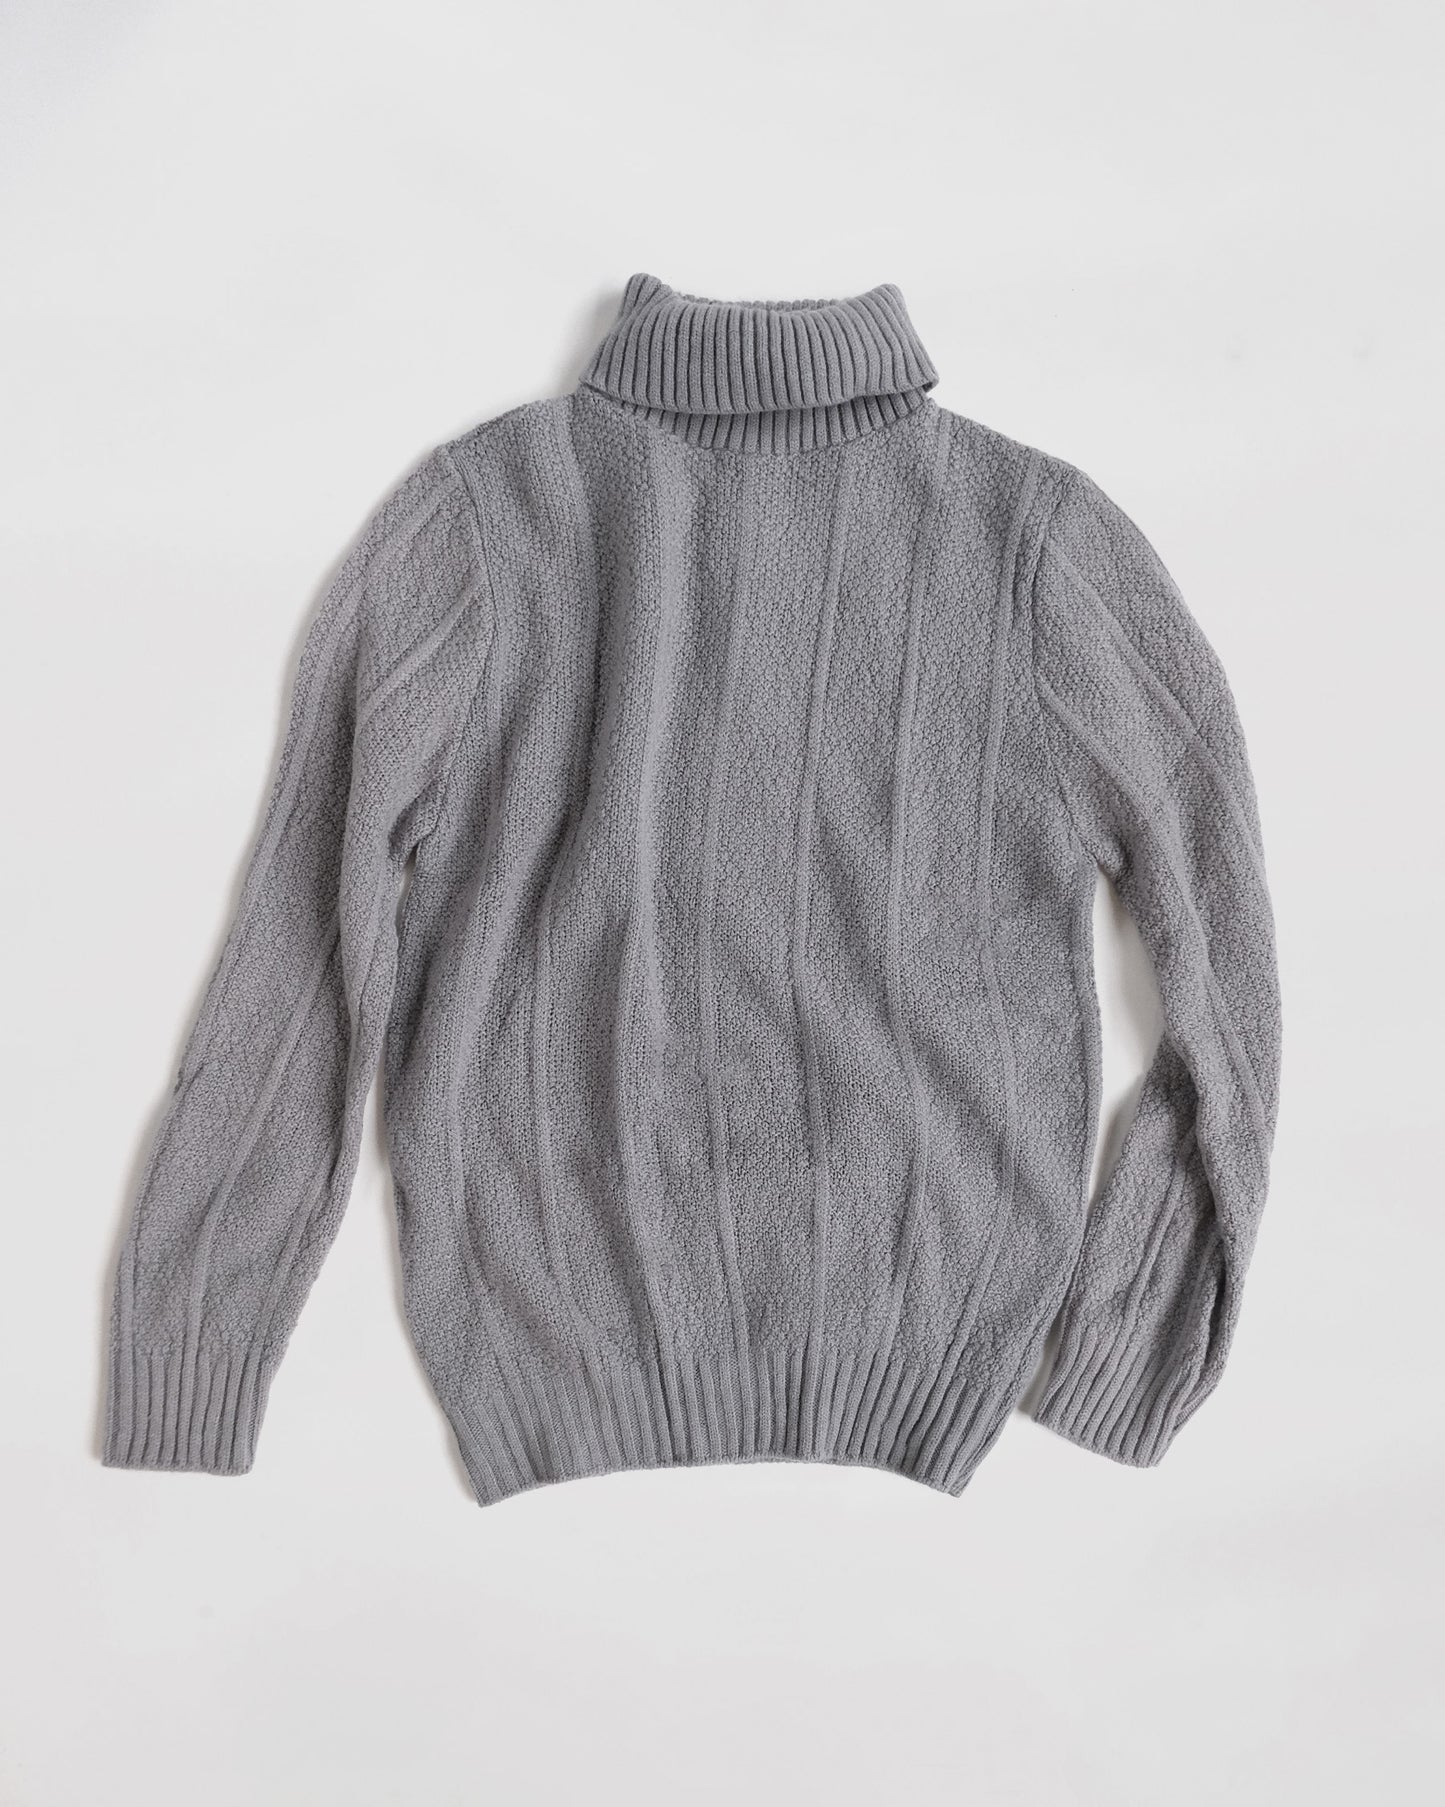 NOS Turtleneck with Back Zipper - Gray